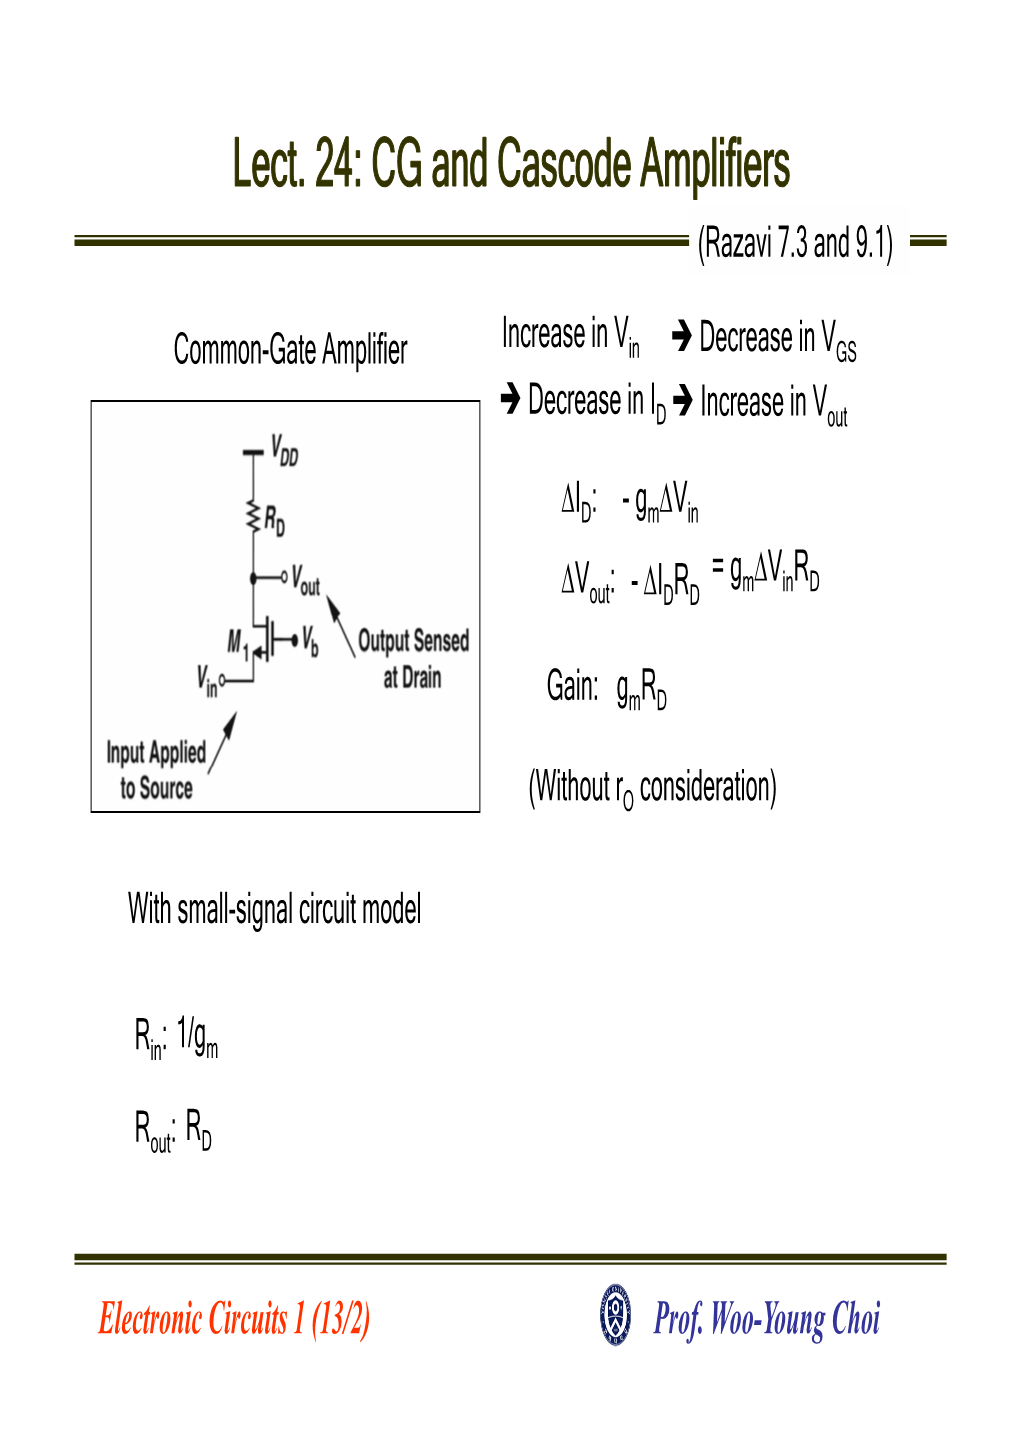 Lect. 24: CG and Cascode Amplifiers (Razavi 7.3 and 9.1)